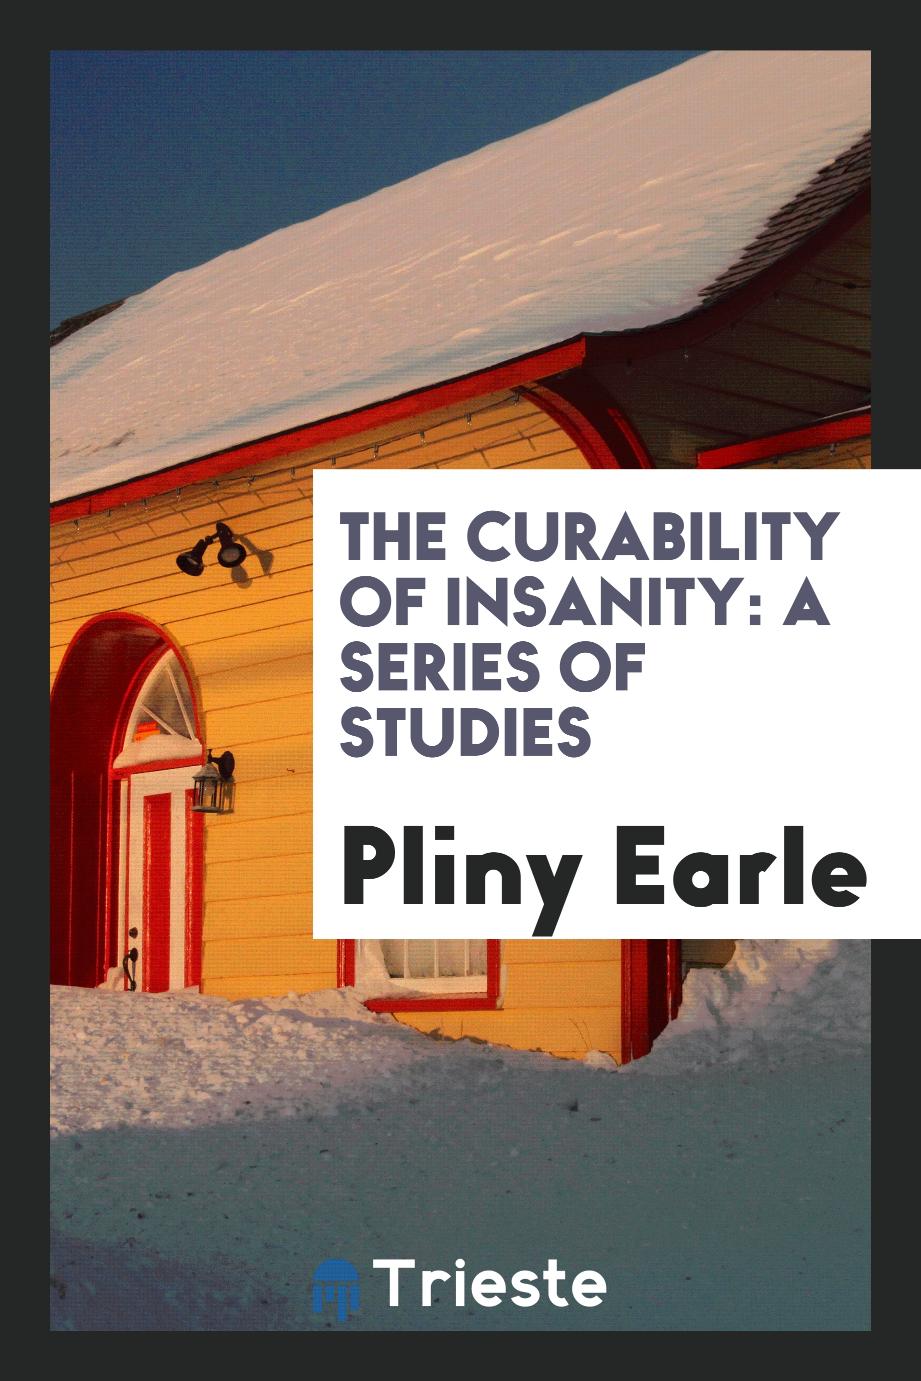 The Curability of insanity: A Series of Studies